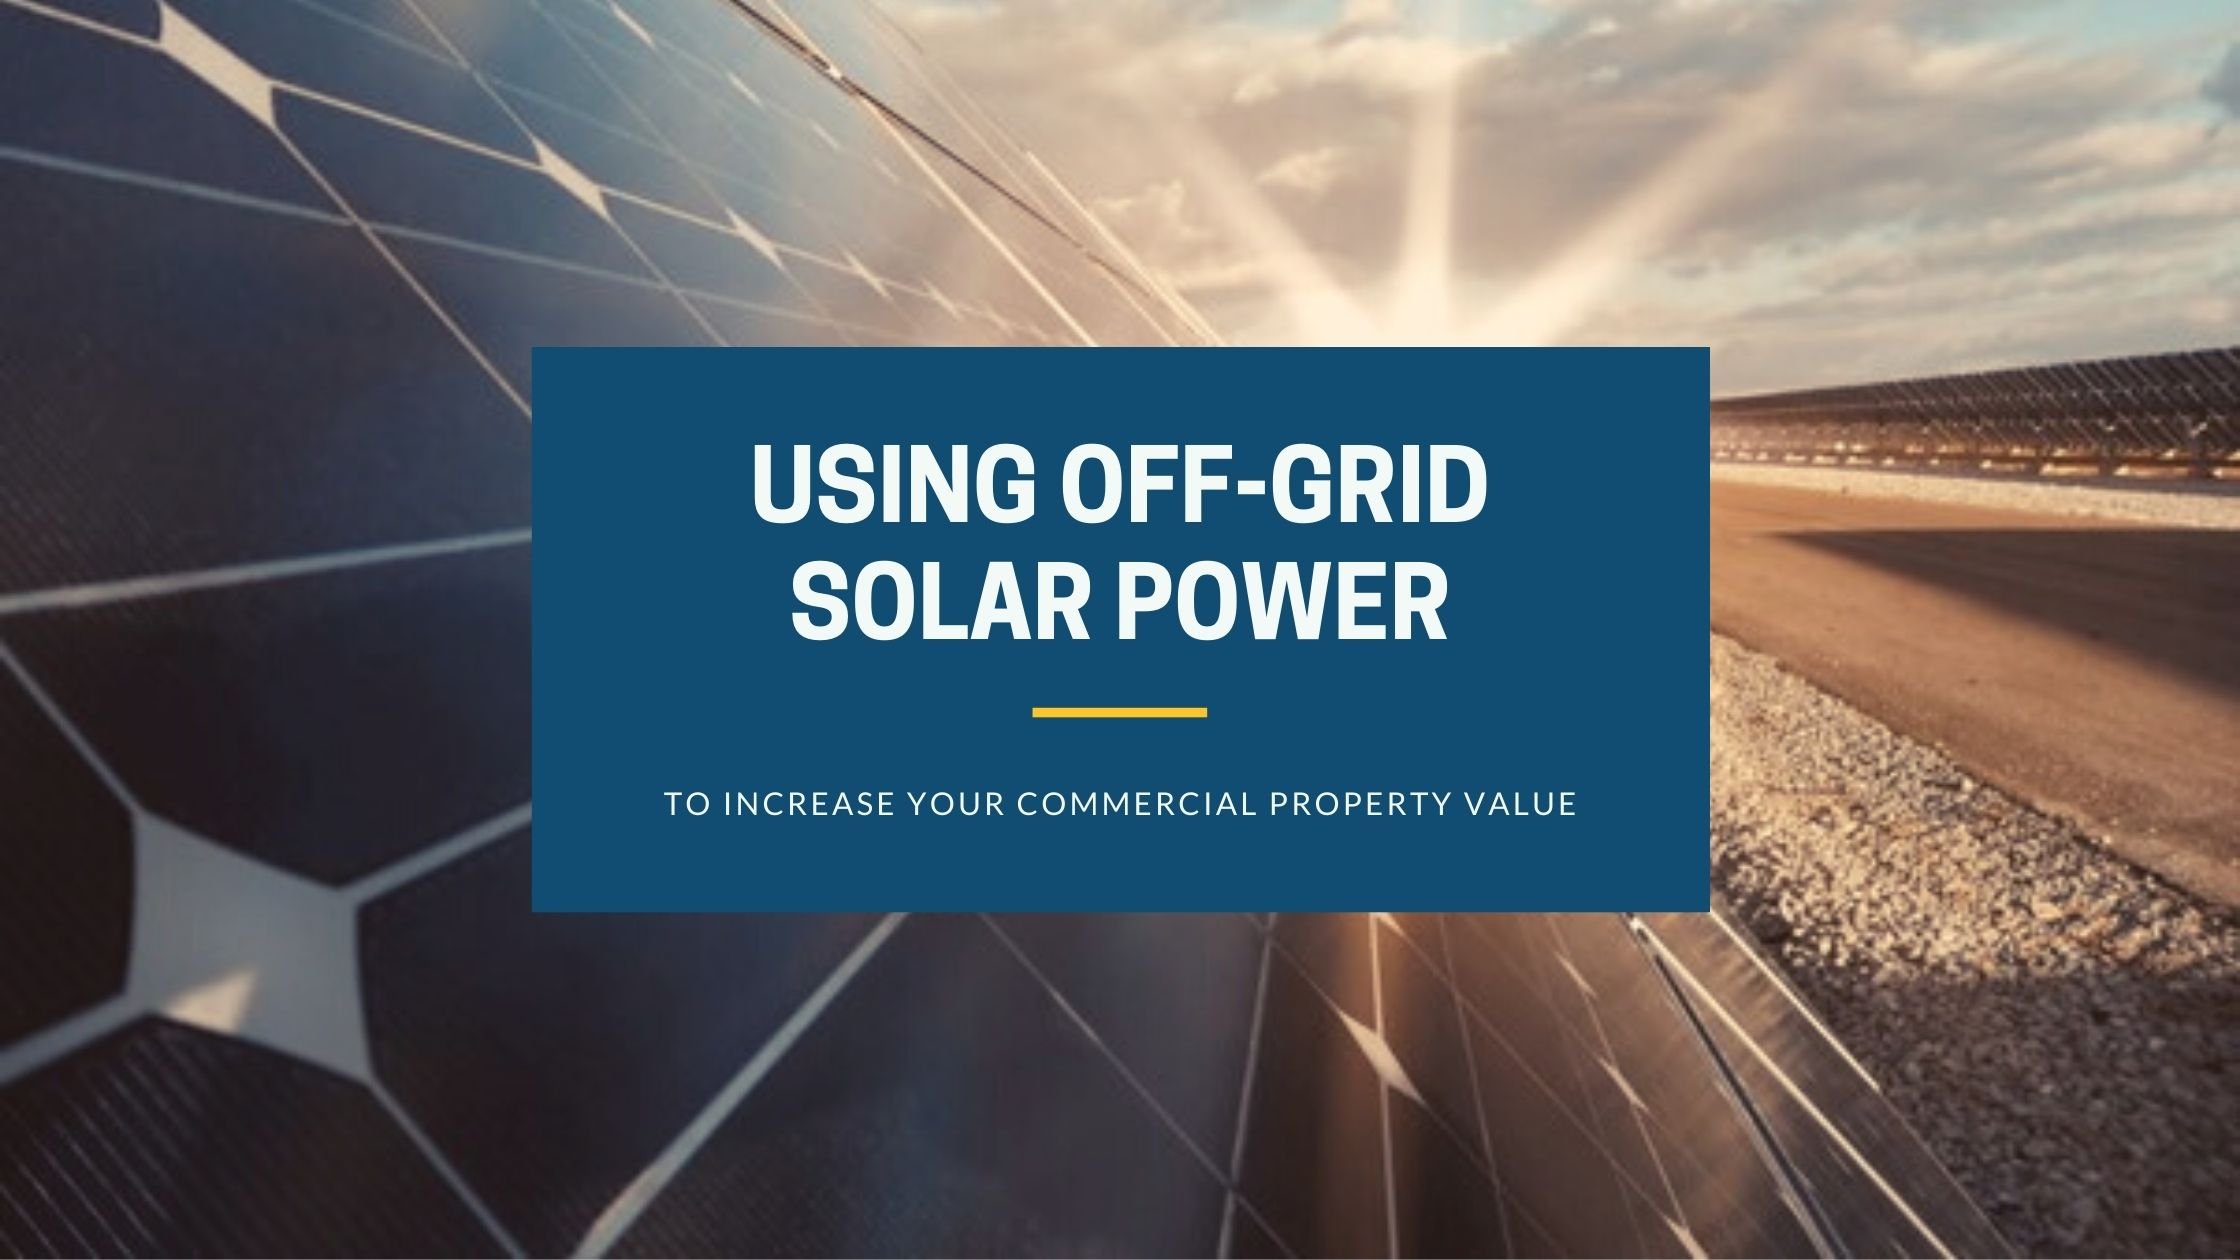 Off-Grid Solar Power for Increasing Property Value